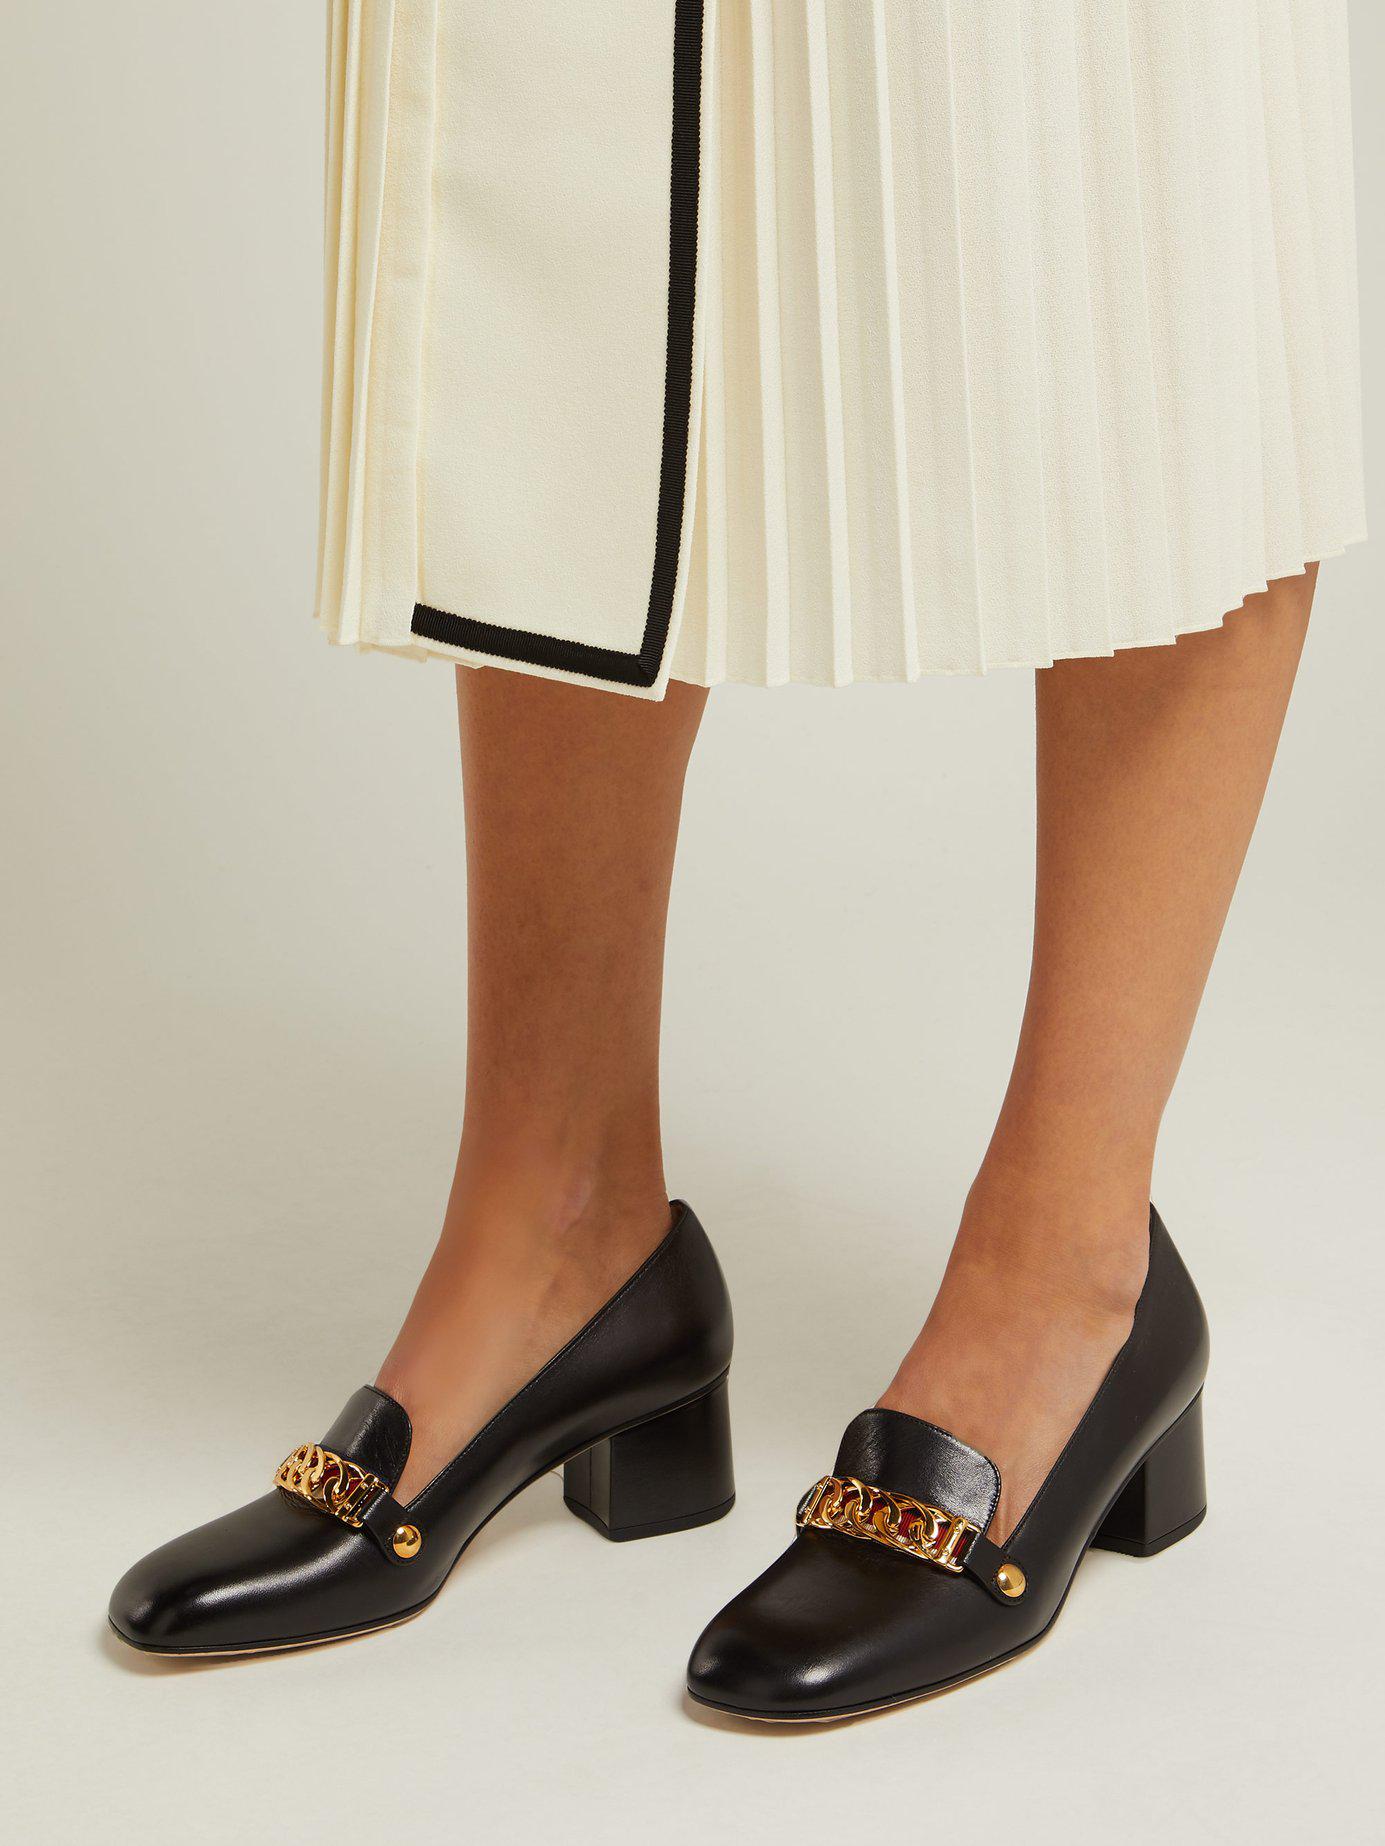 Lyst - Gucci Sylvie Chain-embellished Leather Pumps in Black